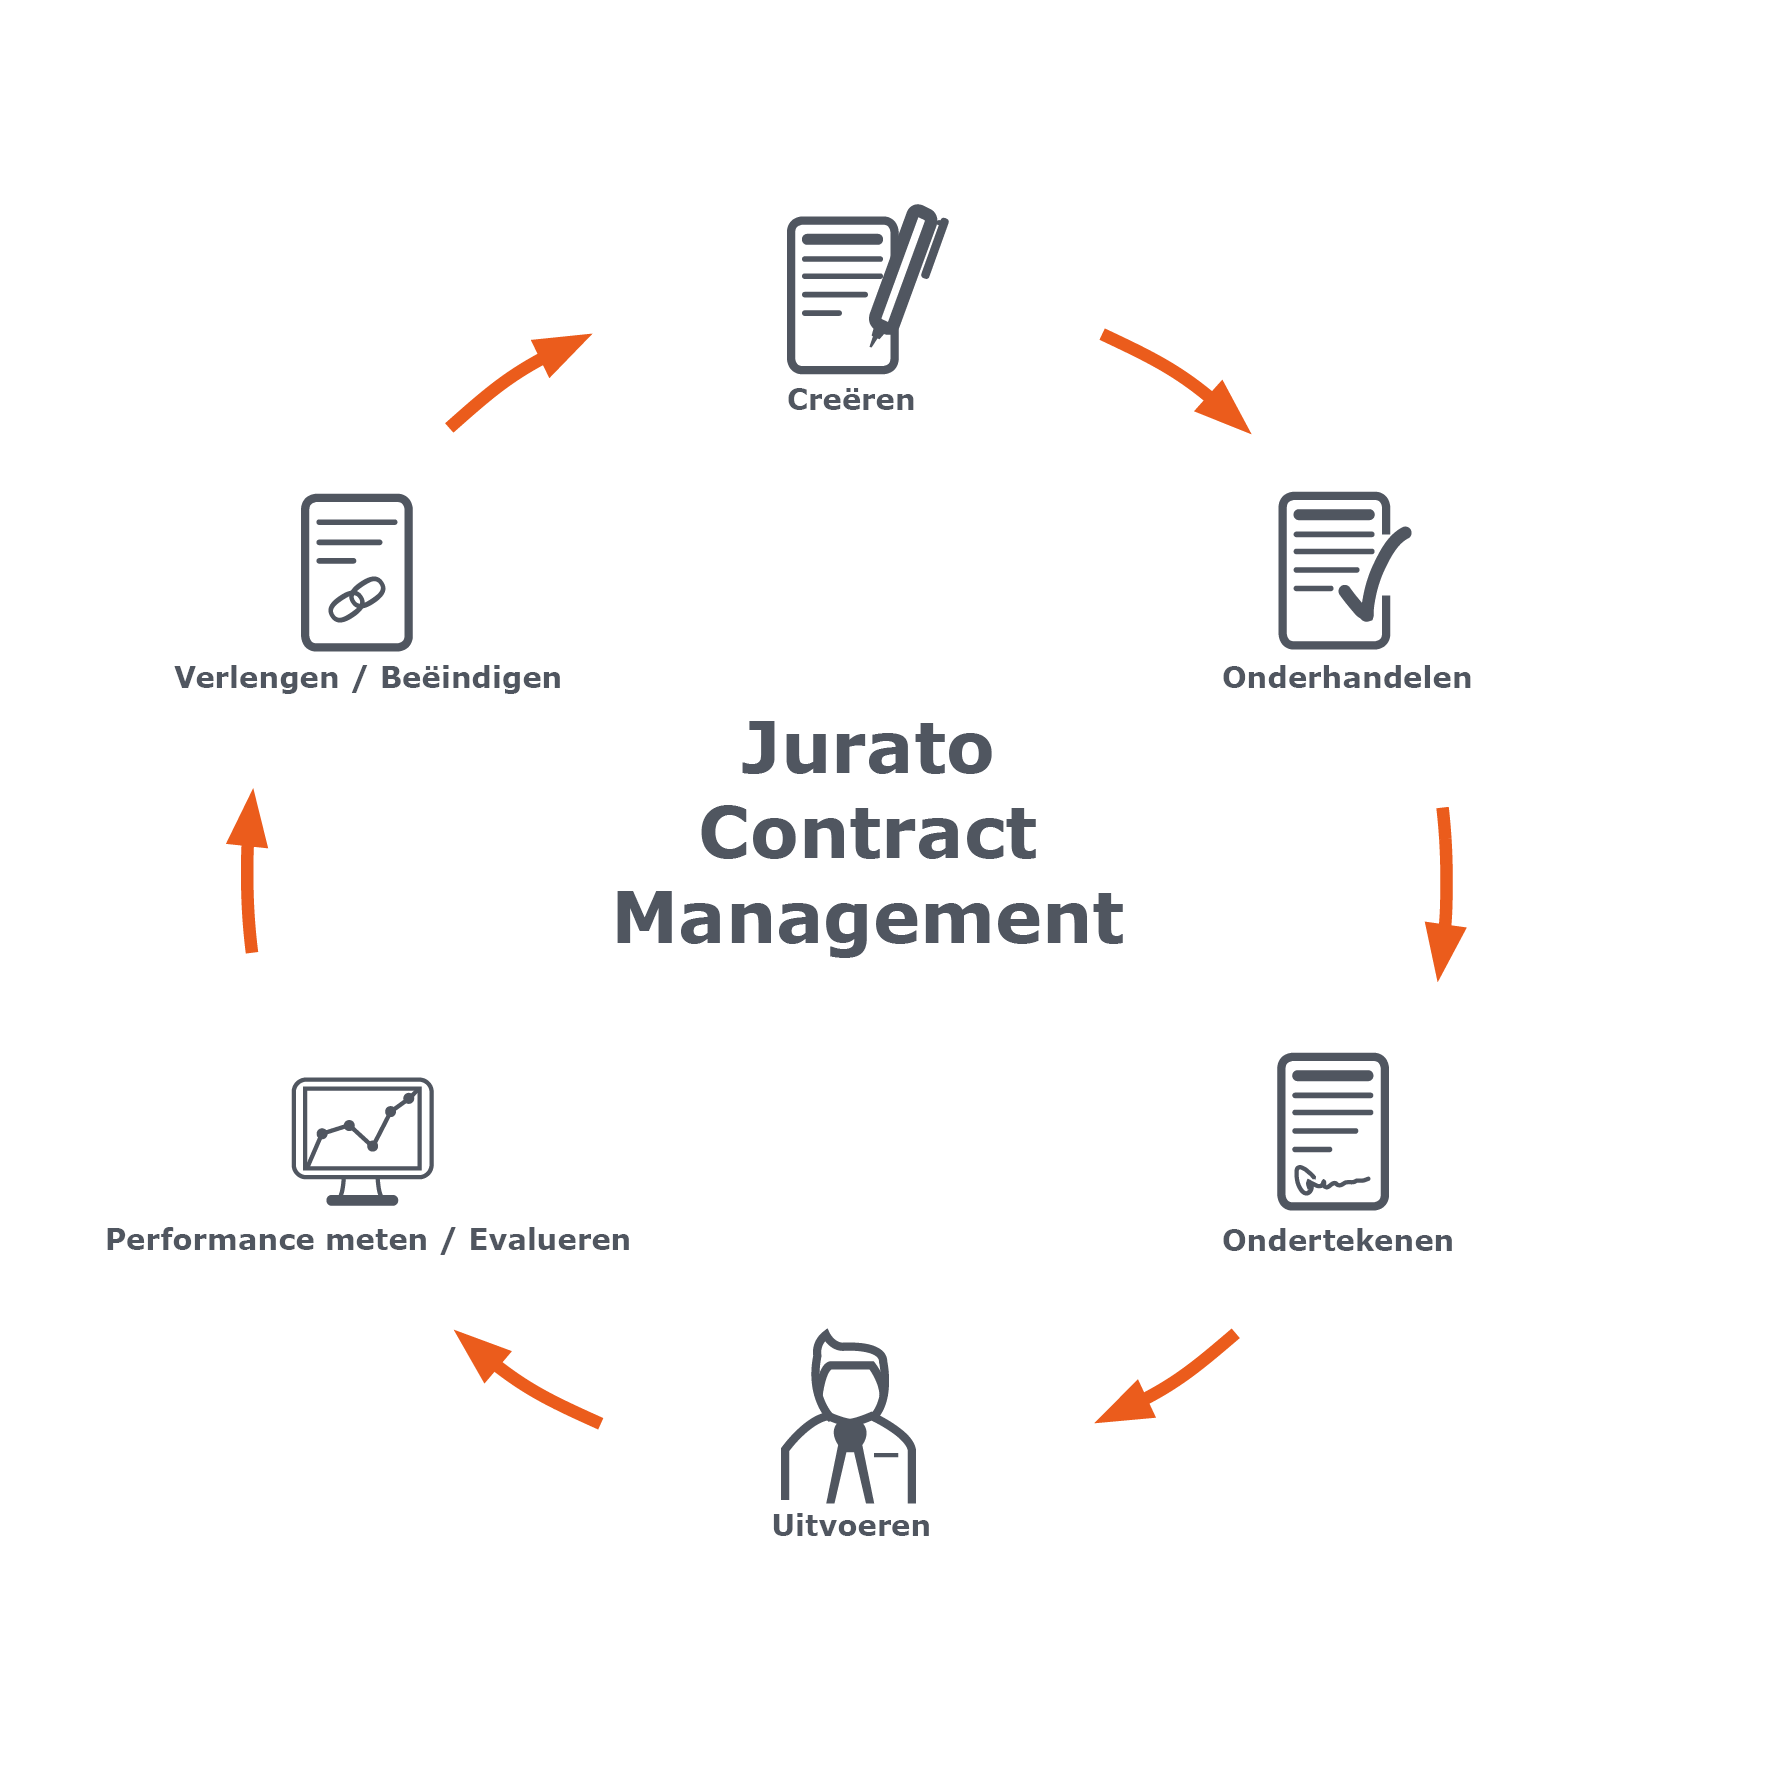 Jurato Contract Management